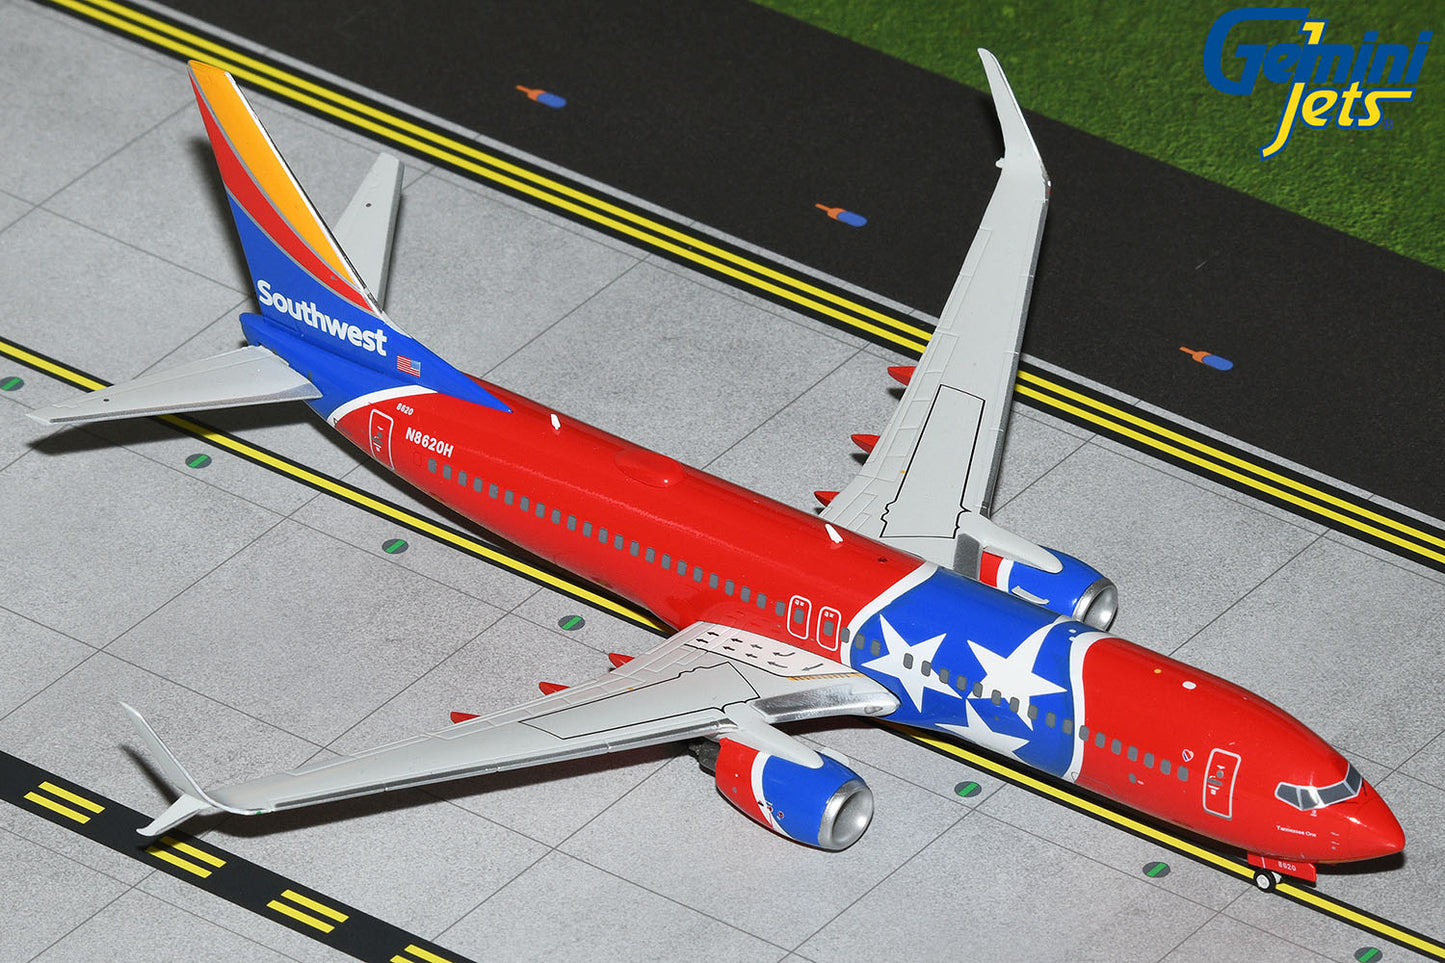 Gemini200 Southwest Airlines Boeing 737-800 "Tennessee One" N8620H